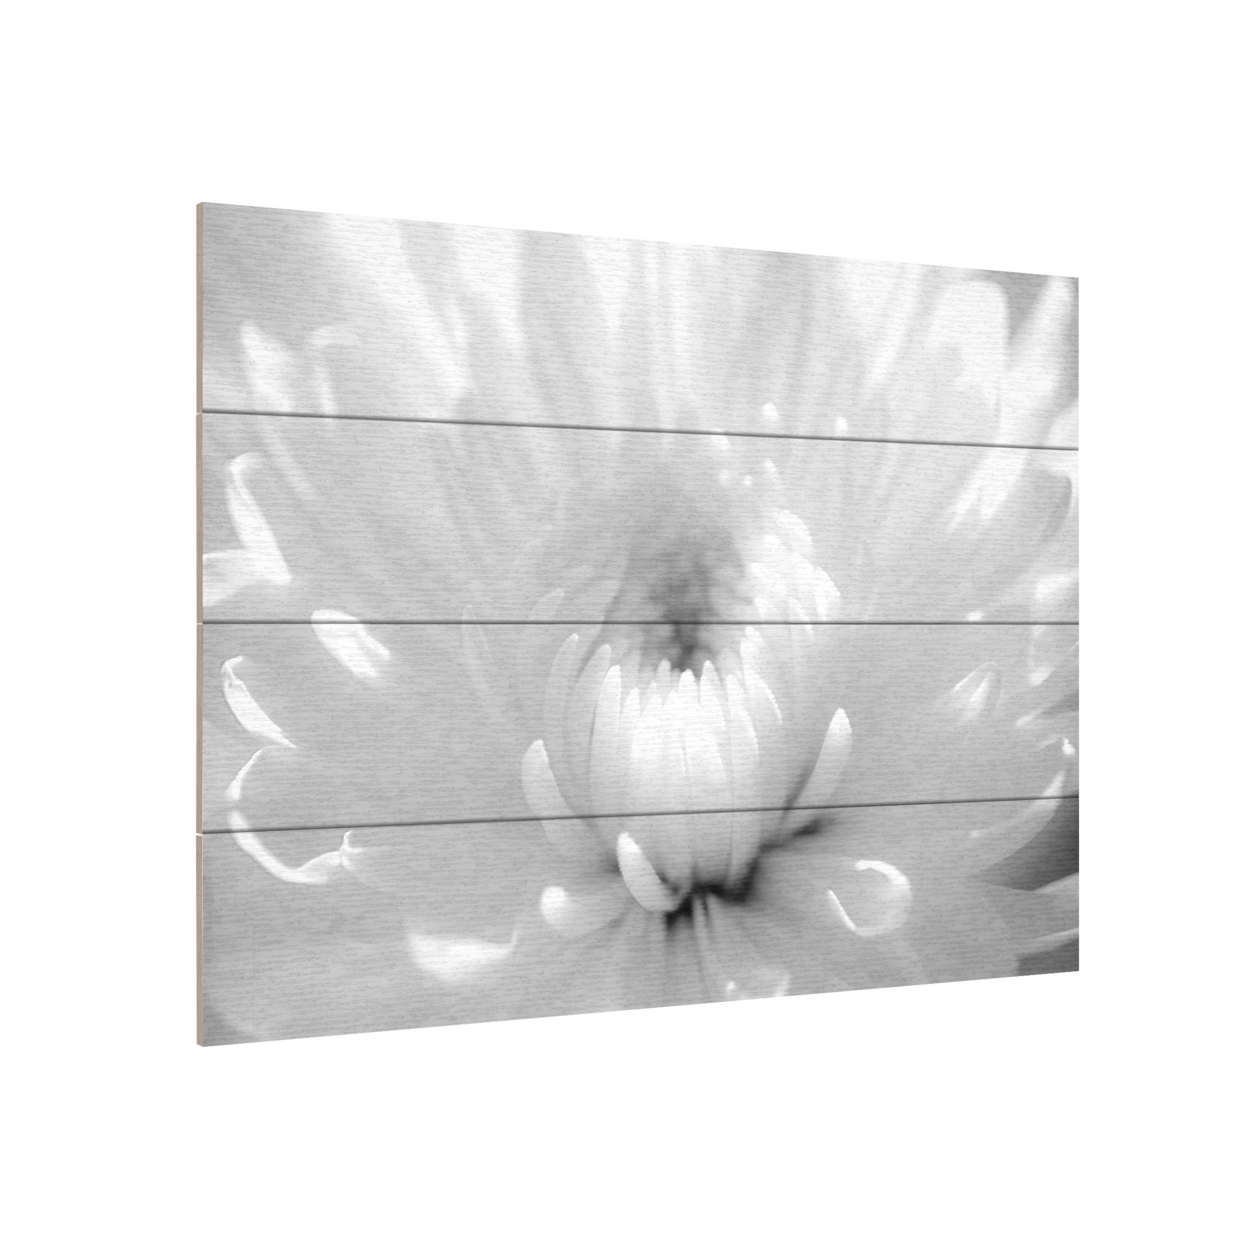 Wall Art 12 X 16 Inches Titled Infrared Flower 2 Ready To Hang Printed On Wooden Planks